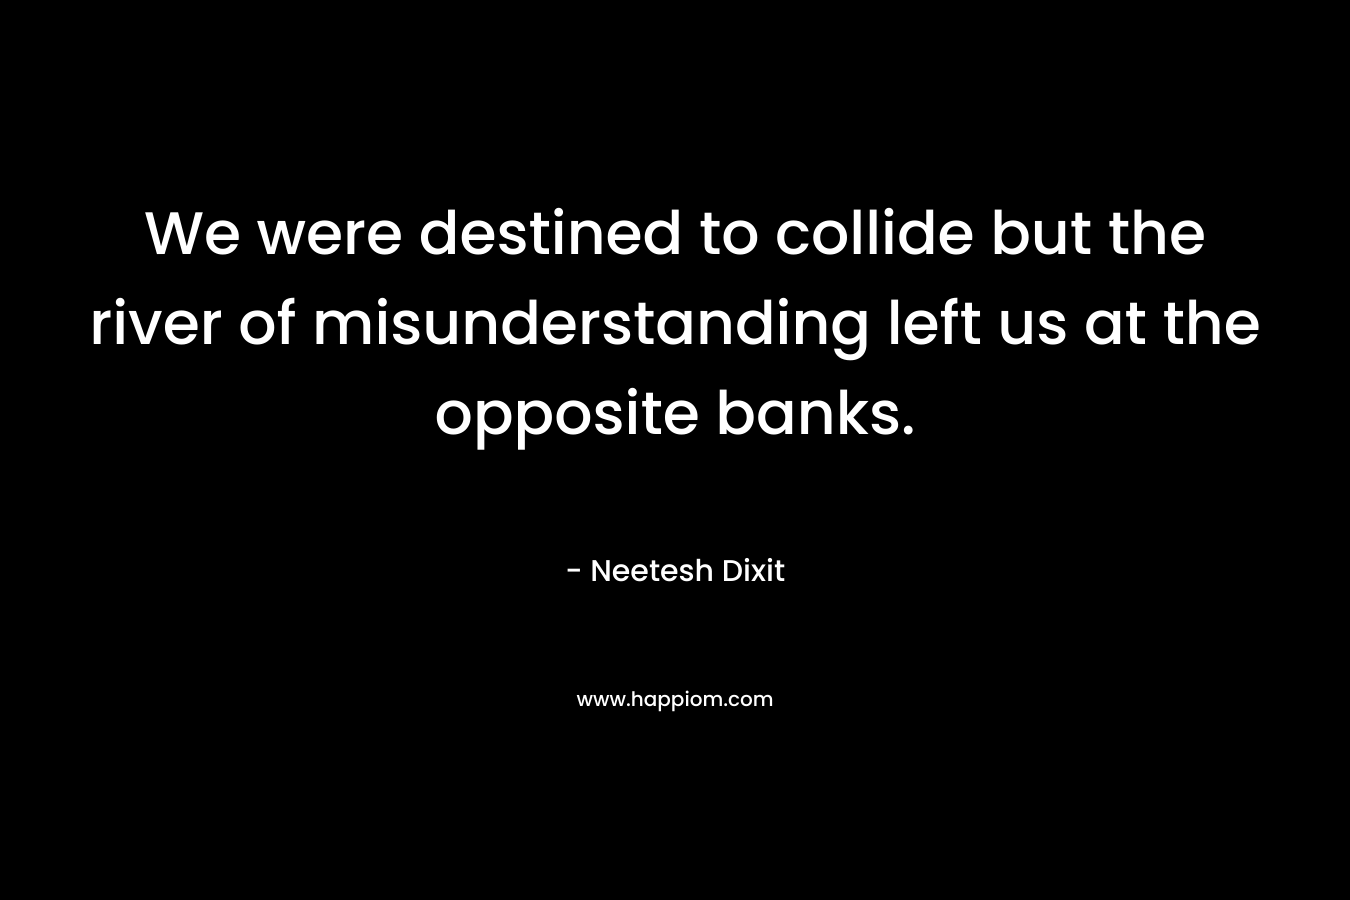 We were destined to collide but the river of misunderstanding left us at the opposite banks.